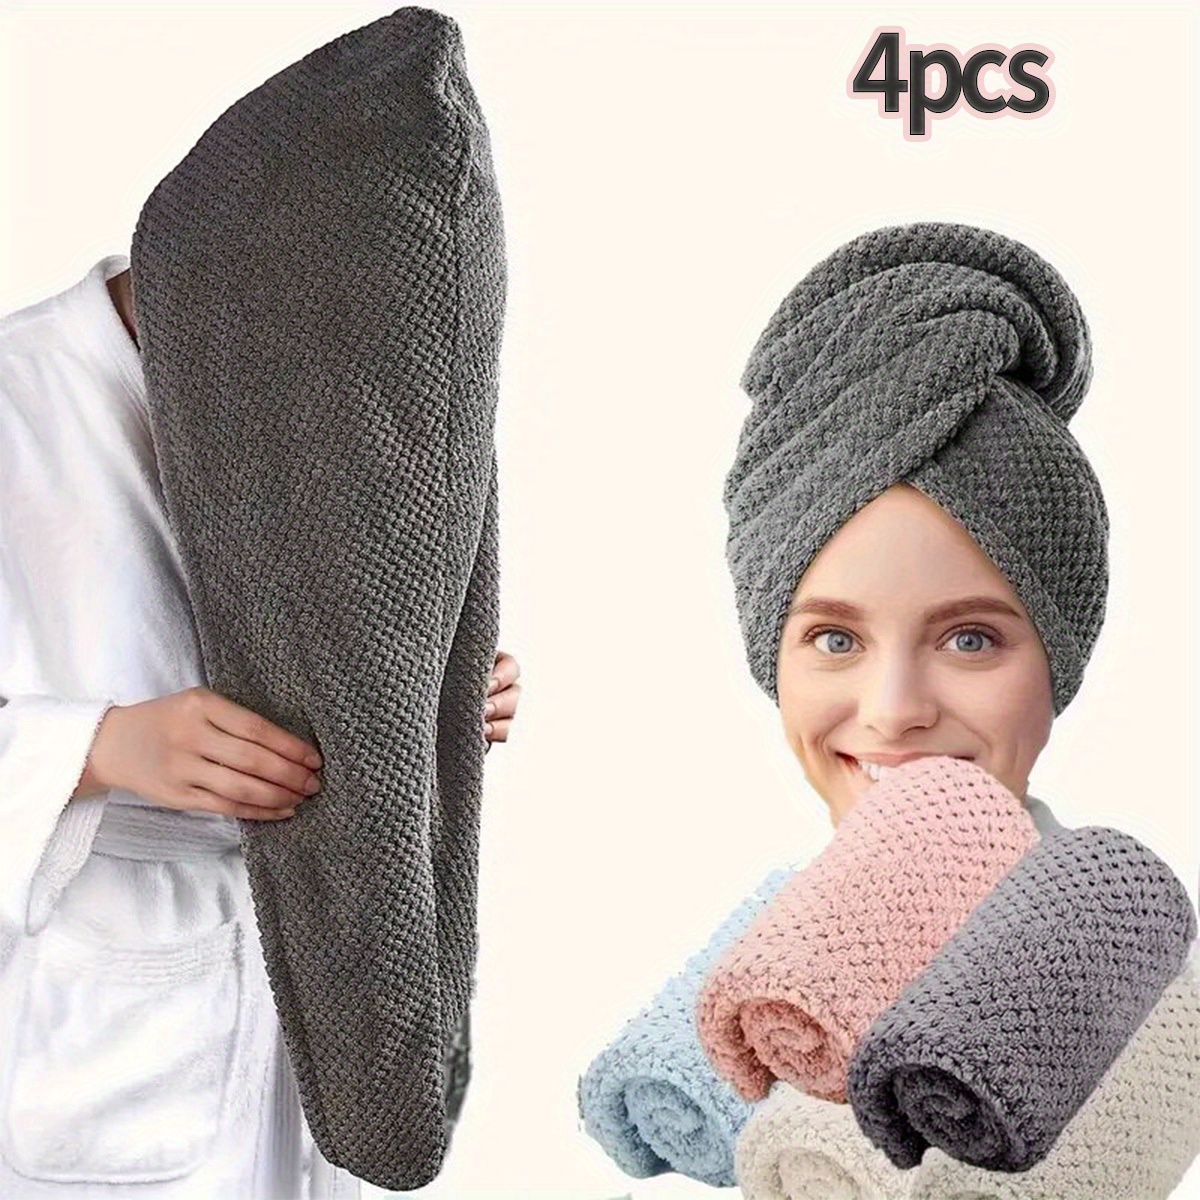 

Ultra-soft Microfiber Hair Towel - Quick Dry, Super Absorbent Wrap For Women & Girls, Gentle On Frizzy Or Damaged Hair, Solid Color Bathroom Accessory (1pc/4pcs Set, 300gsm)